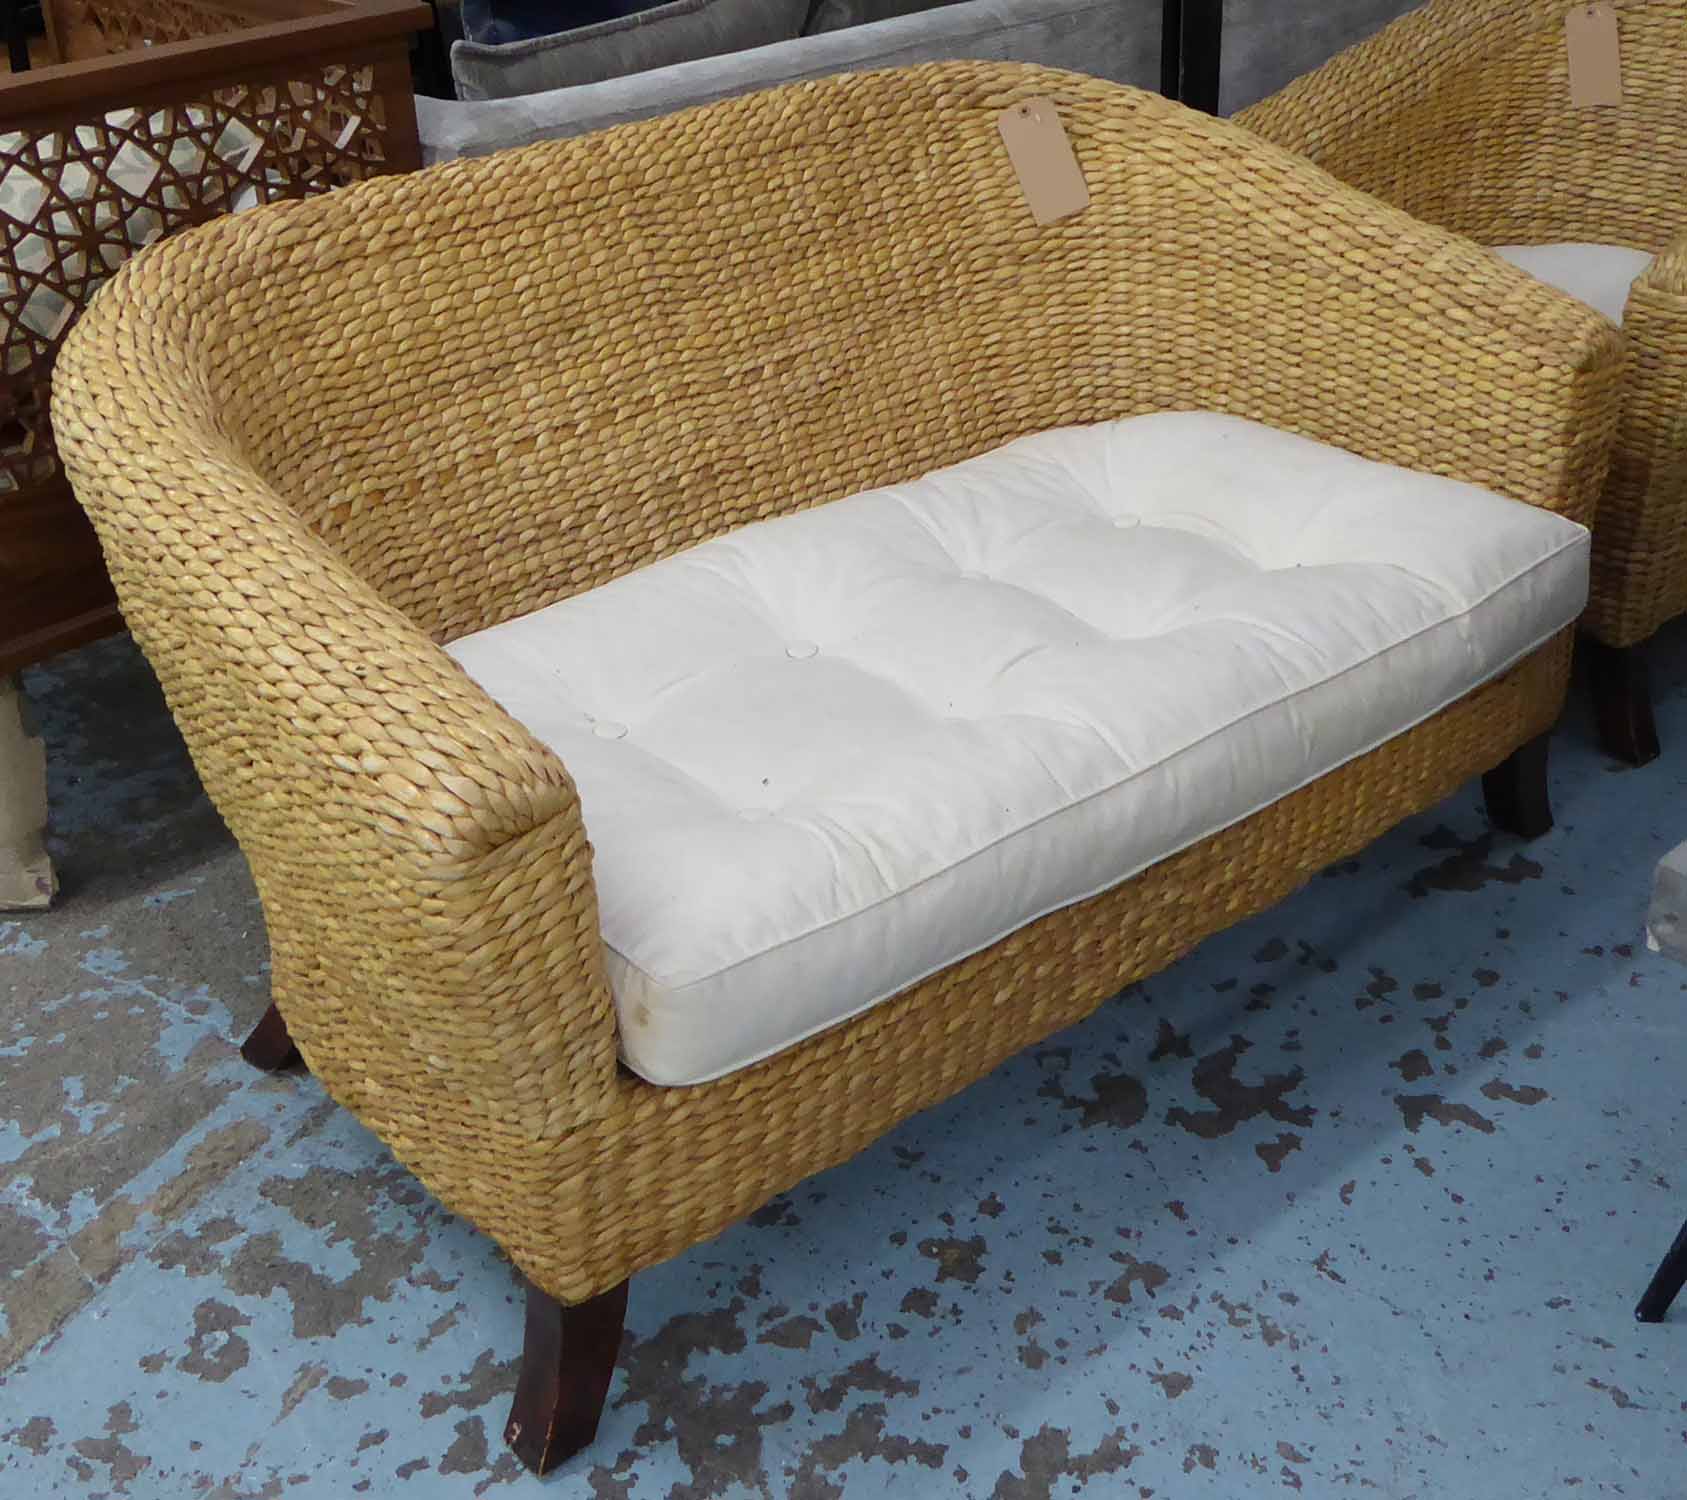 CONSERVATORY WICKER SOFA, rounded back on splayed legs,